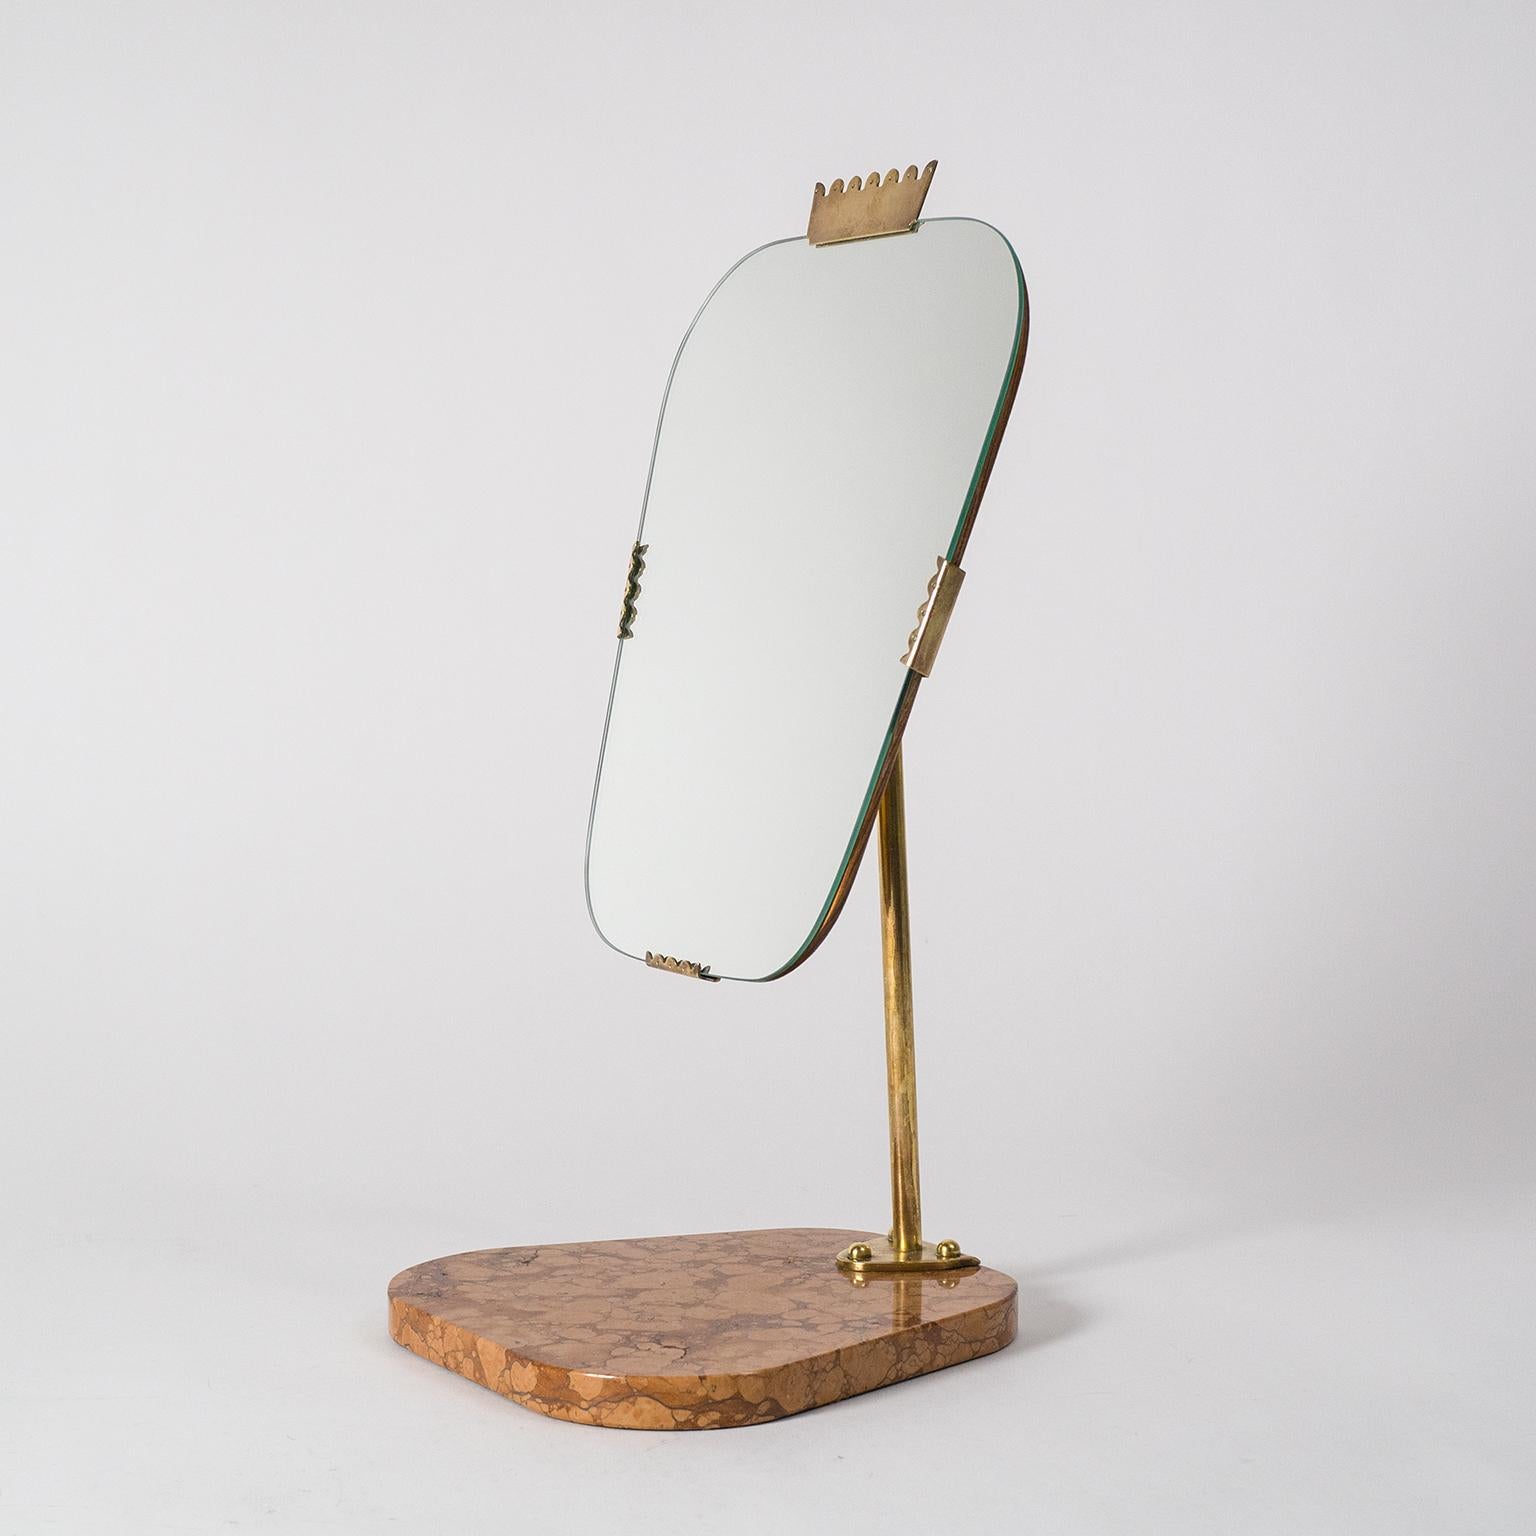 Beautiful Swedish vanity mirror, late Art Deco, circa 1940. Solid red stone base with a brass arm and pivoting mechanism holds a tapered mirror with teak backplate and brass details. Very nice condition with patina on the brass. Mirror measures: